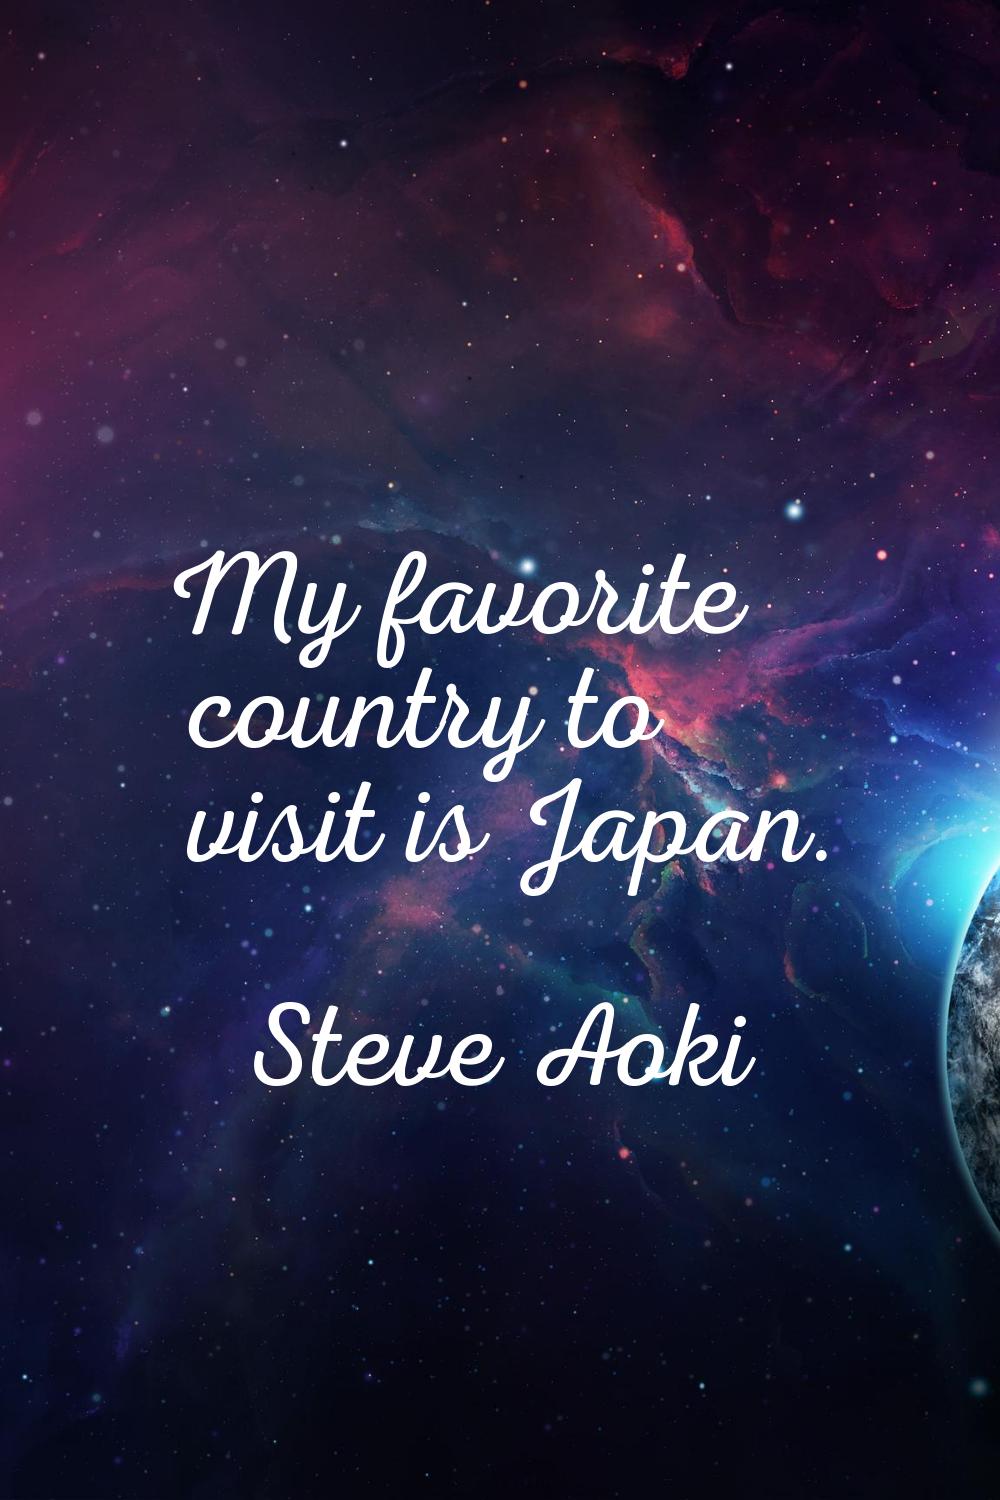 My favorite country to visit is Japan.